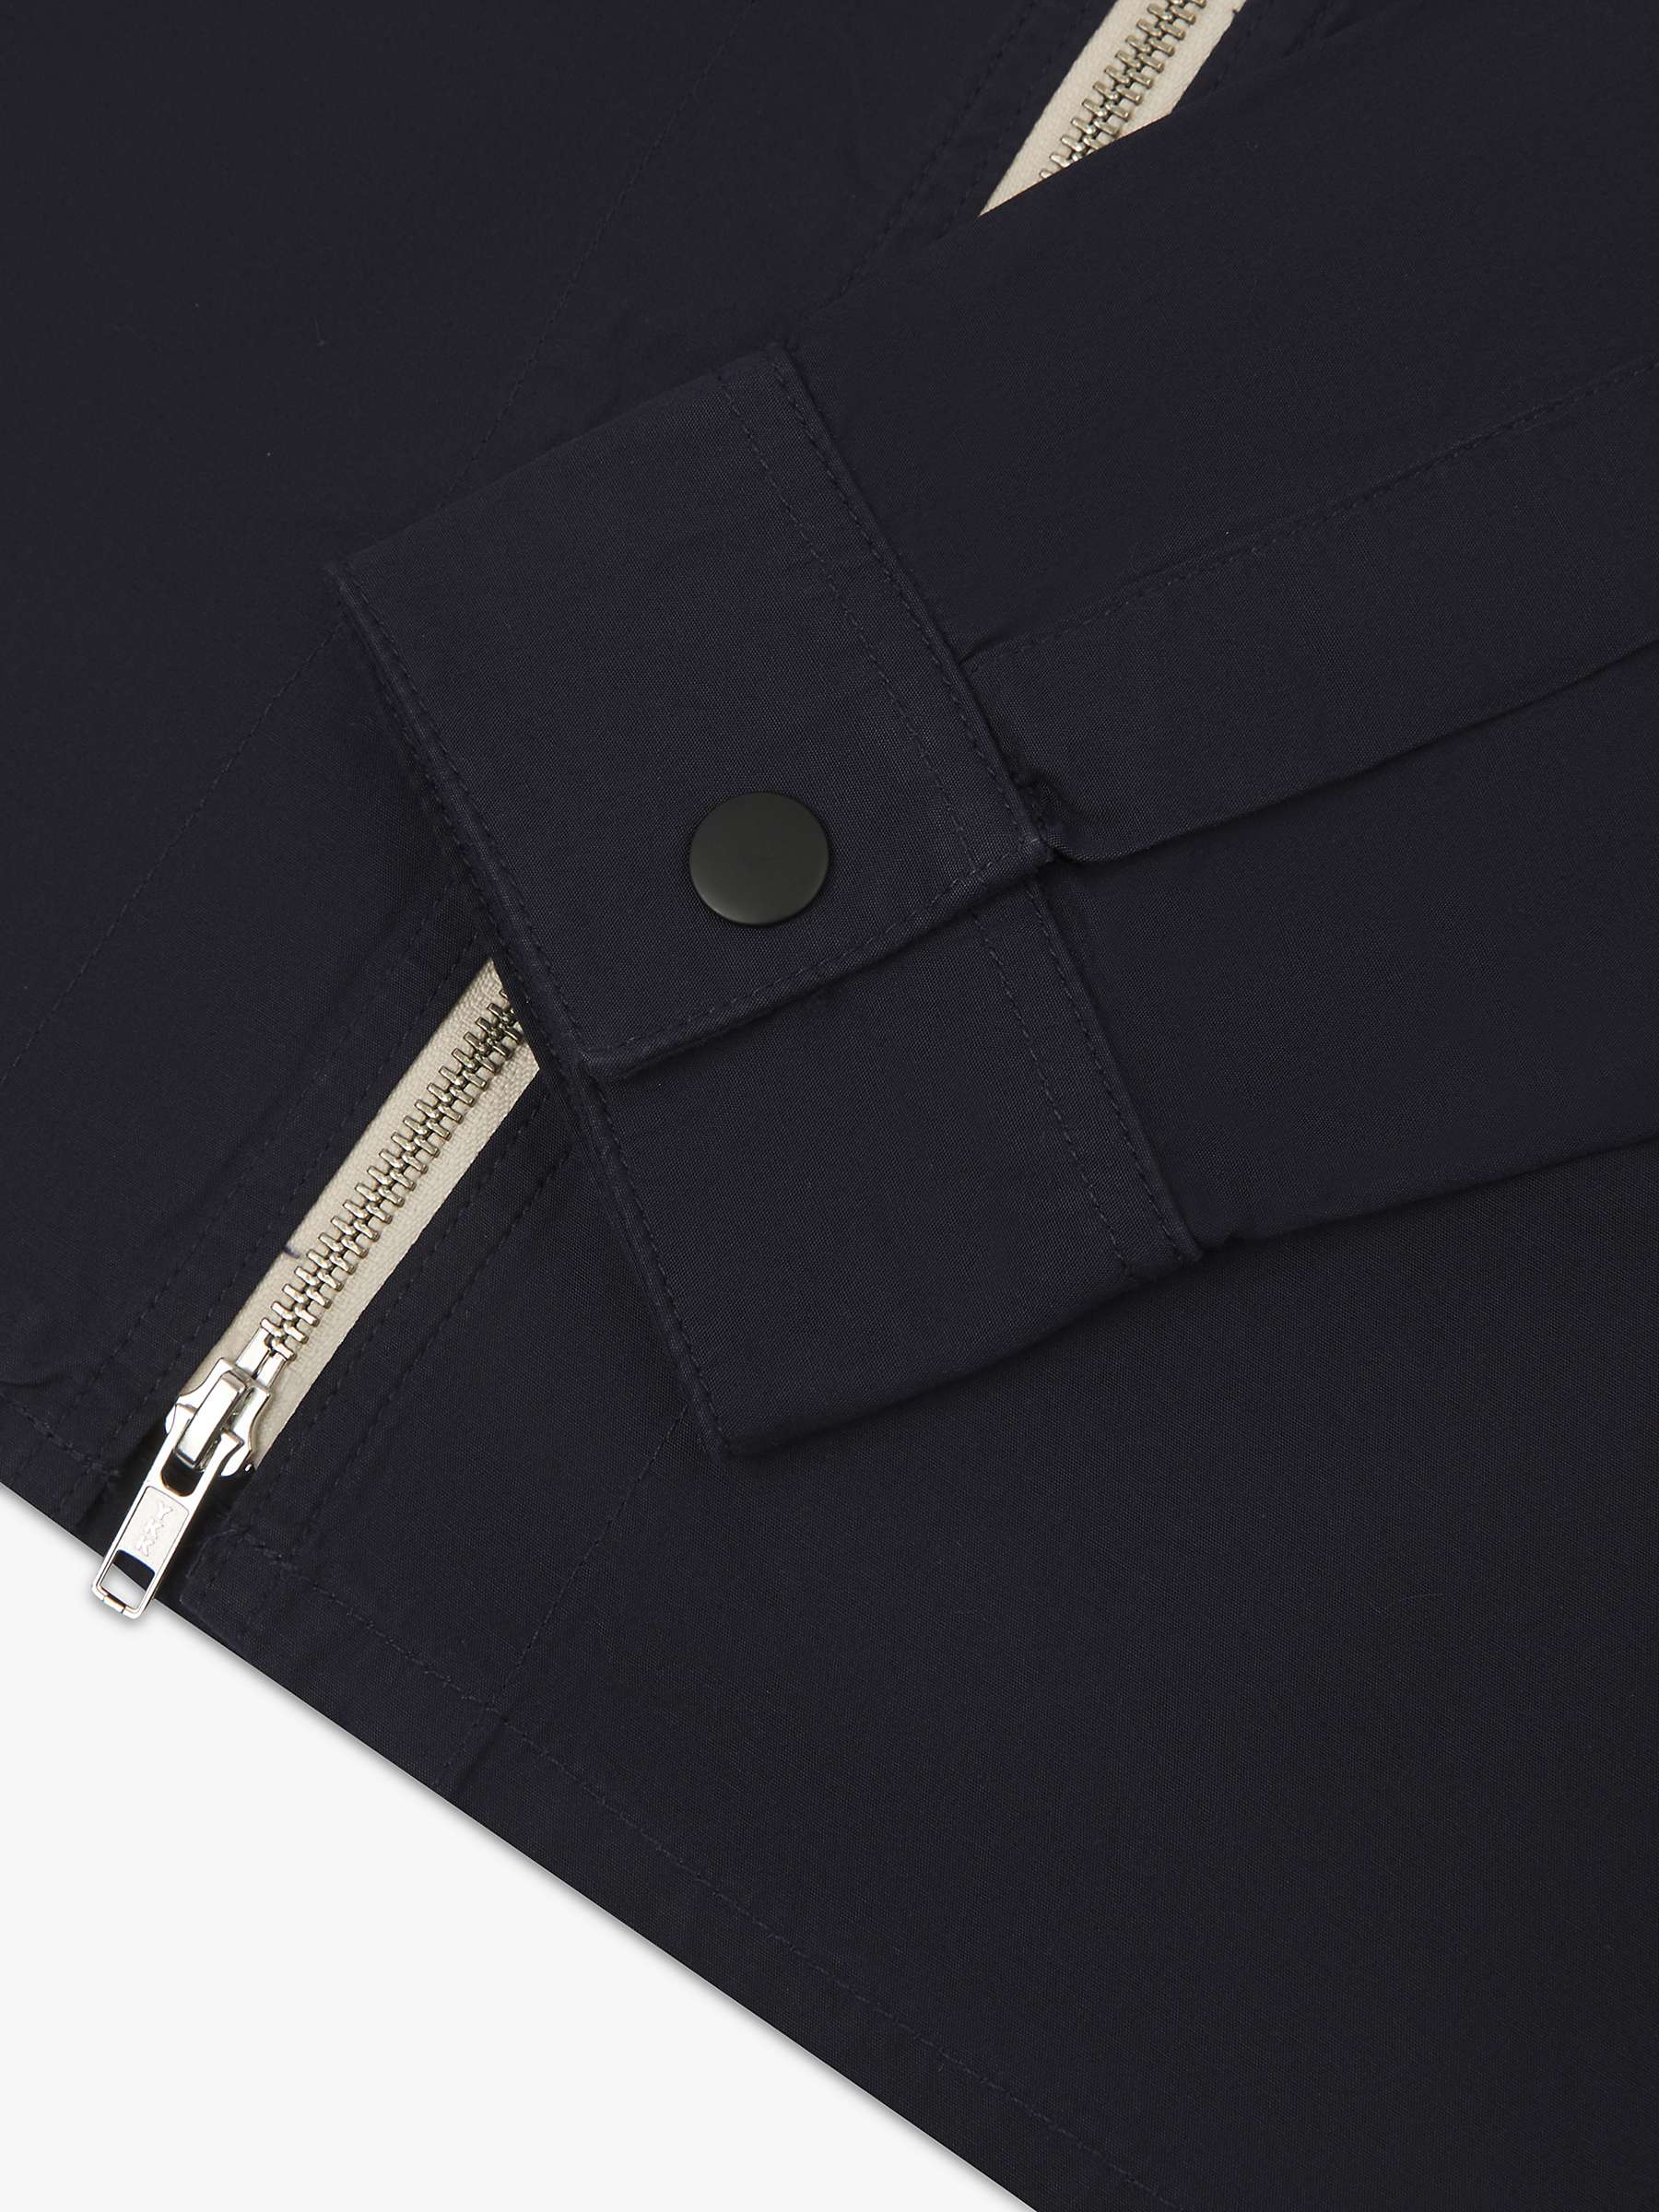 Buy Uskees Light Weight Zip Front Shirt, Midnight Blue Online at johnlewis.com